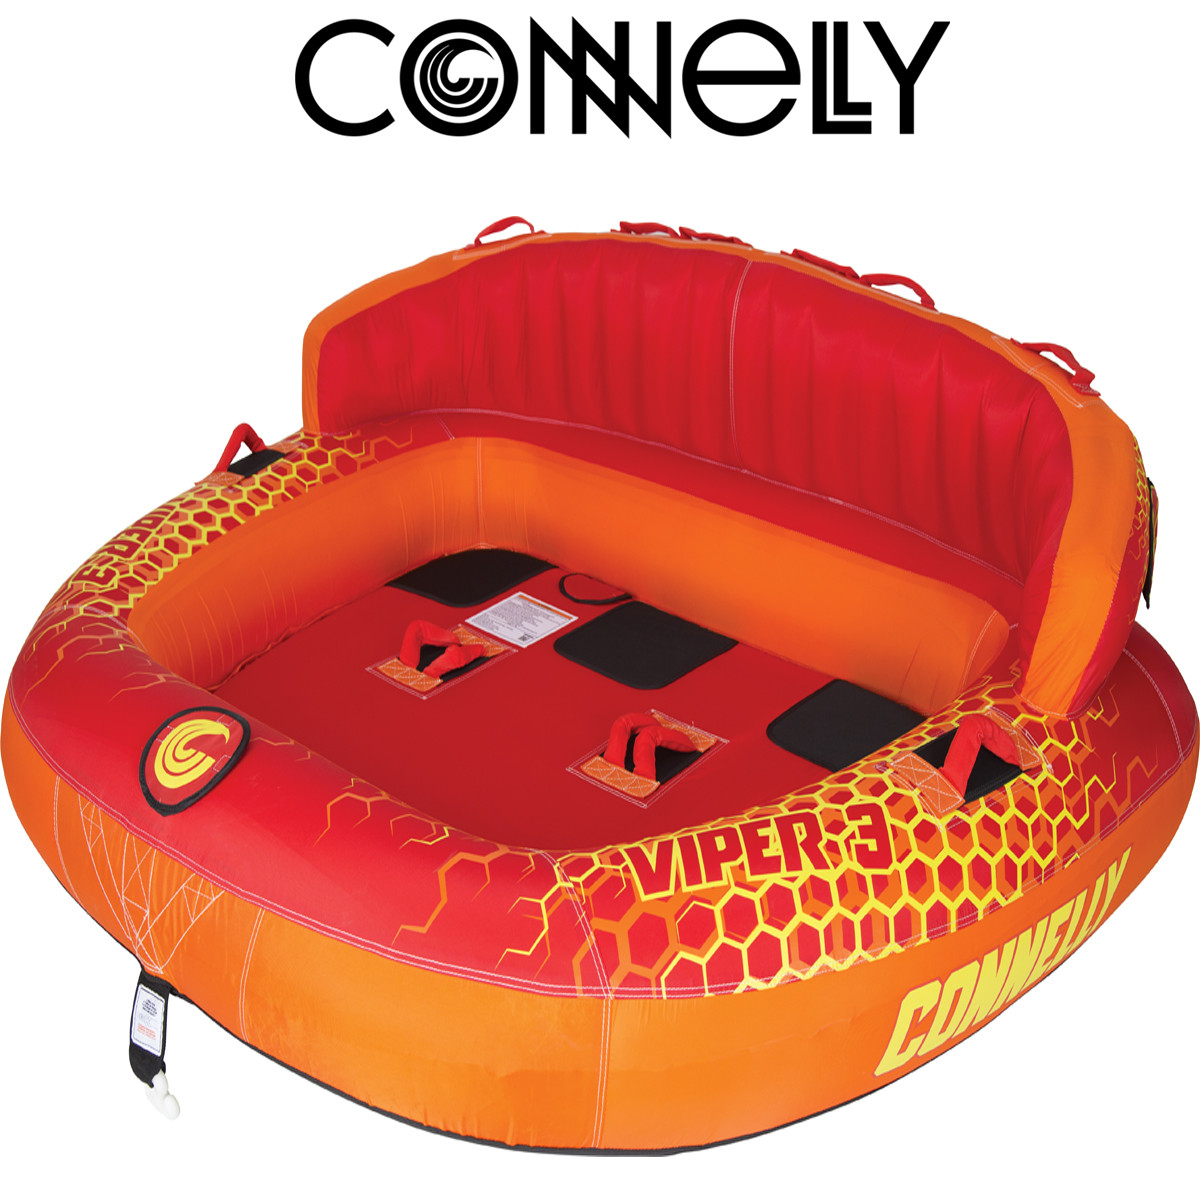 Towable Tubes Boat Tubes Ski Tubes Connelly Viper 3Person